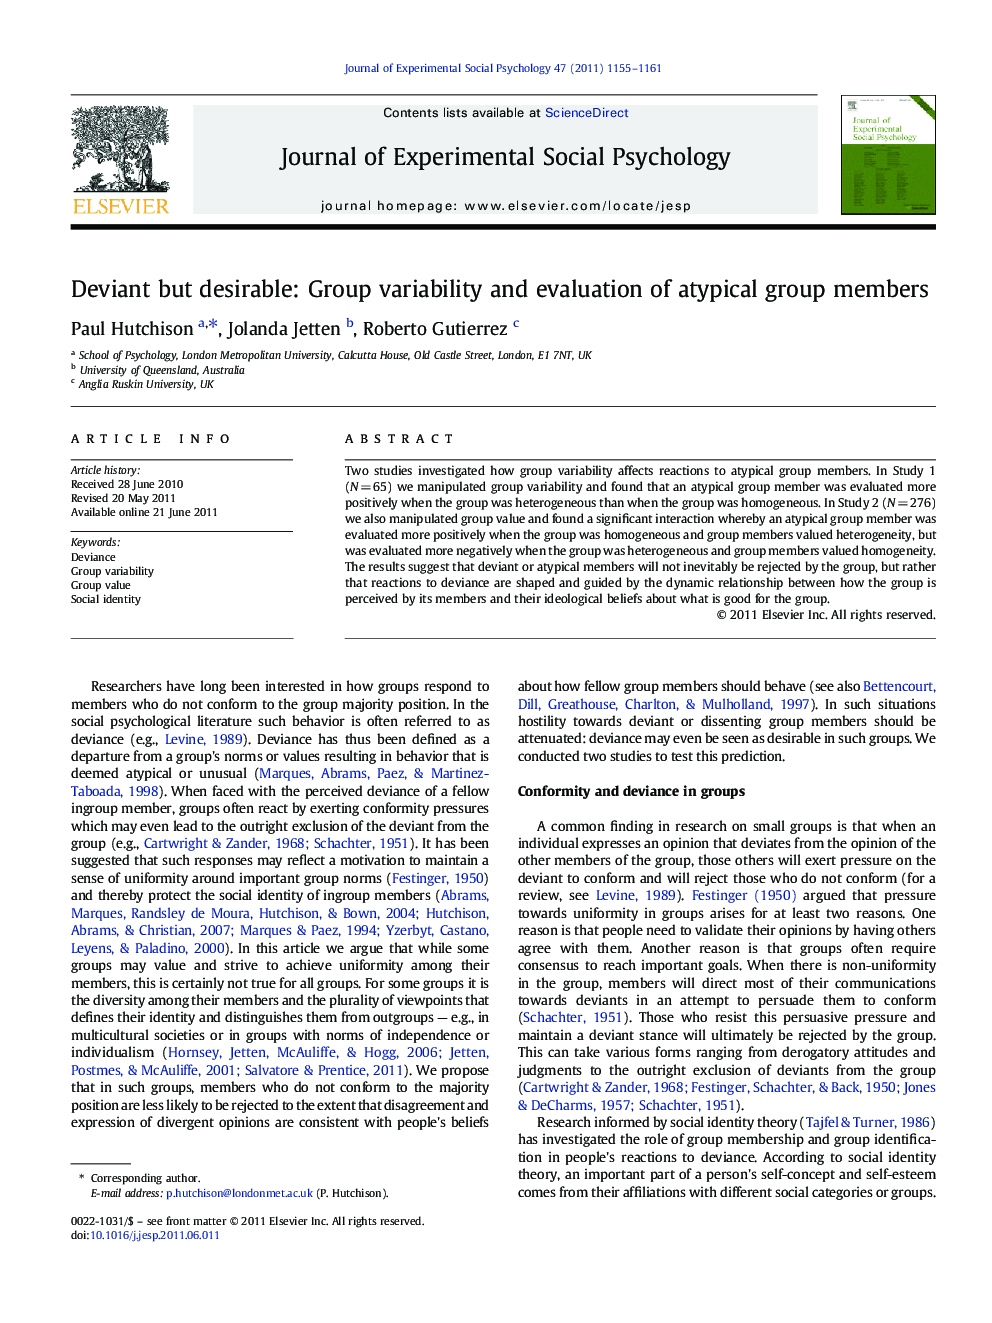 Deviant but desirable: Group variability and evaluation of atypical group members